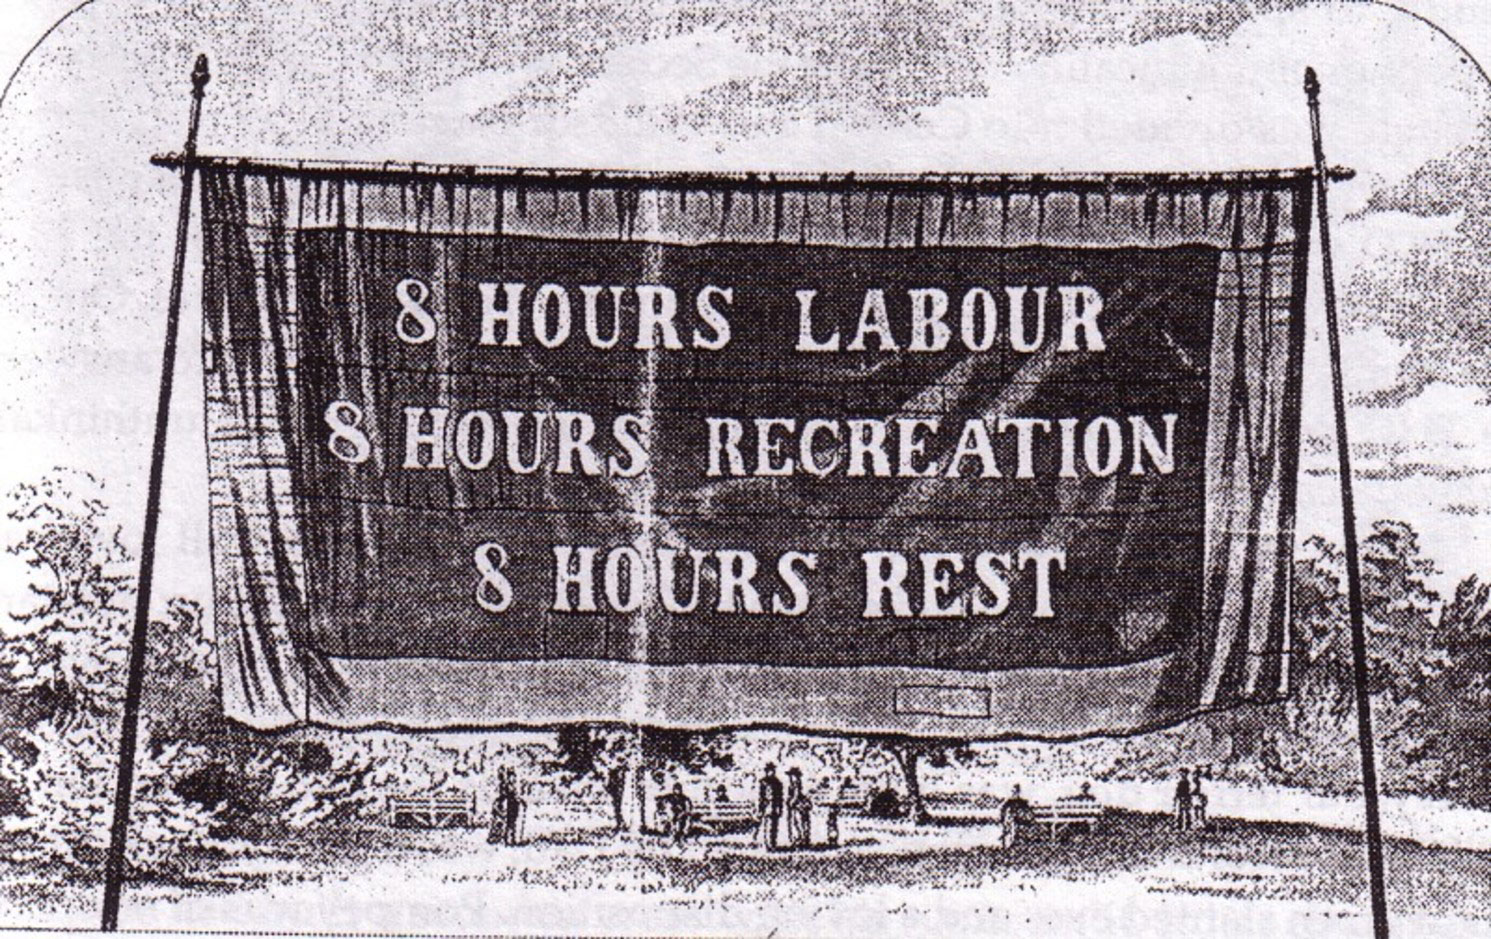 Eight-hour day banner, Melbourne, 1856.